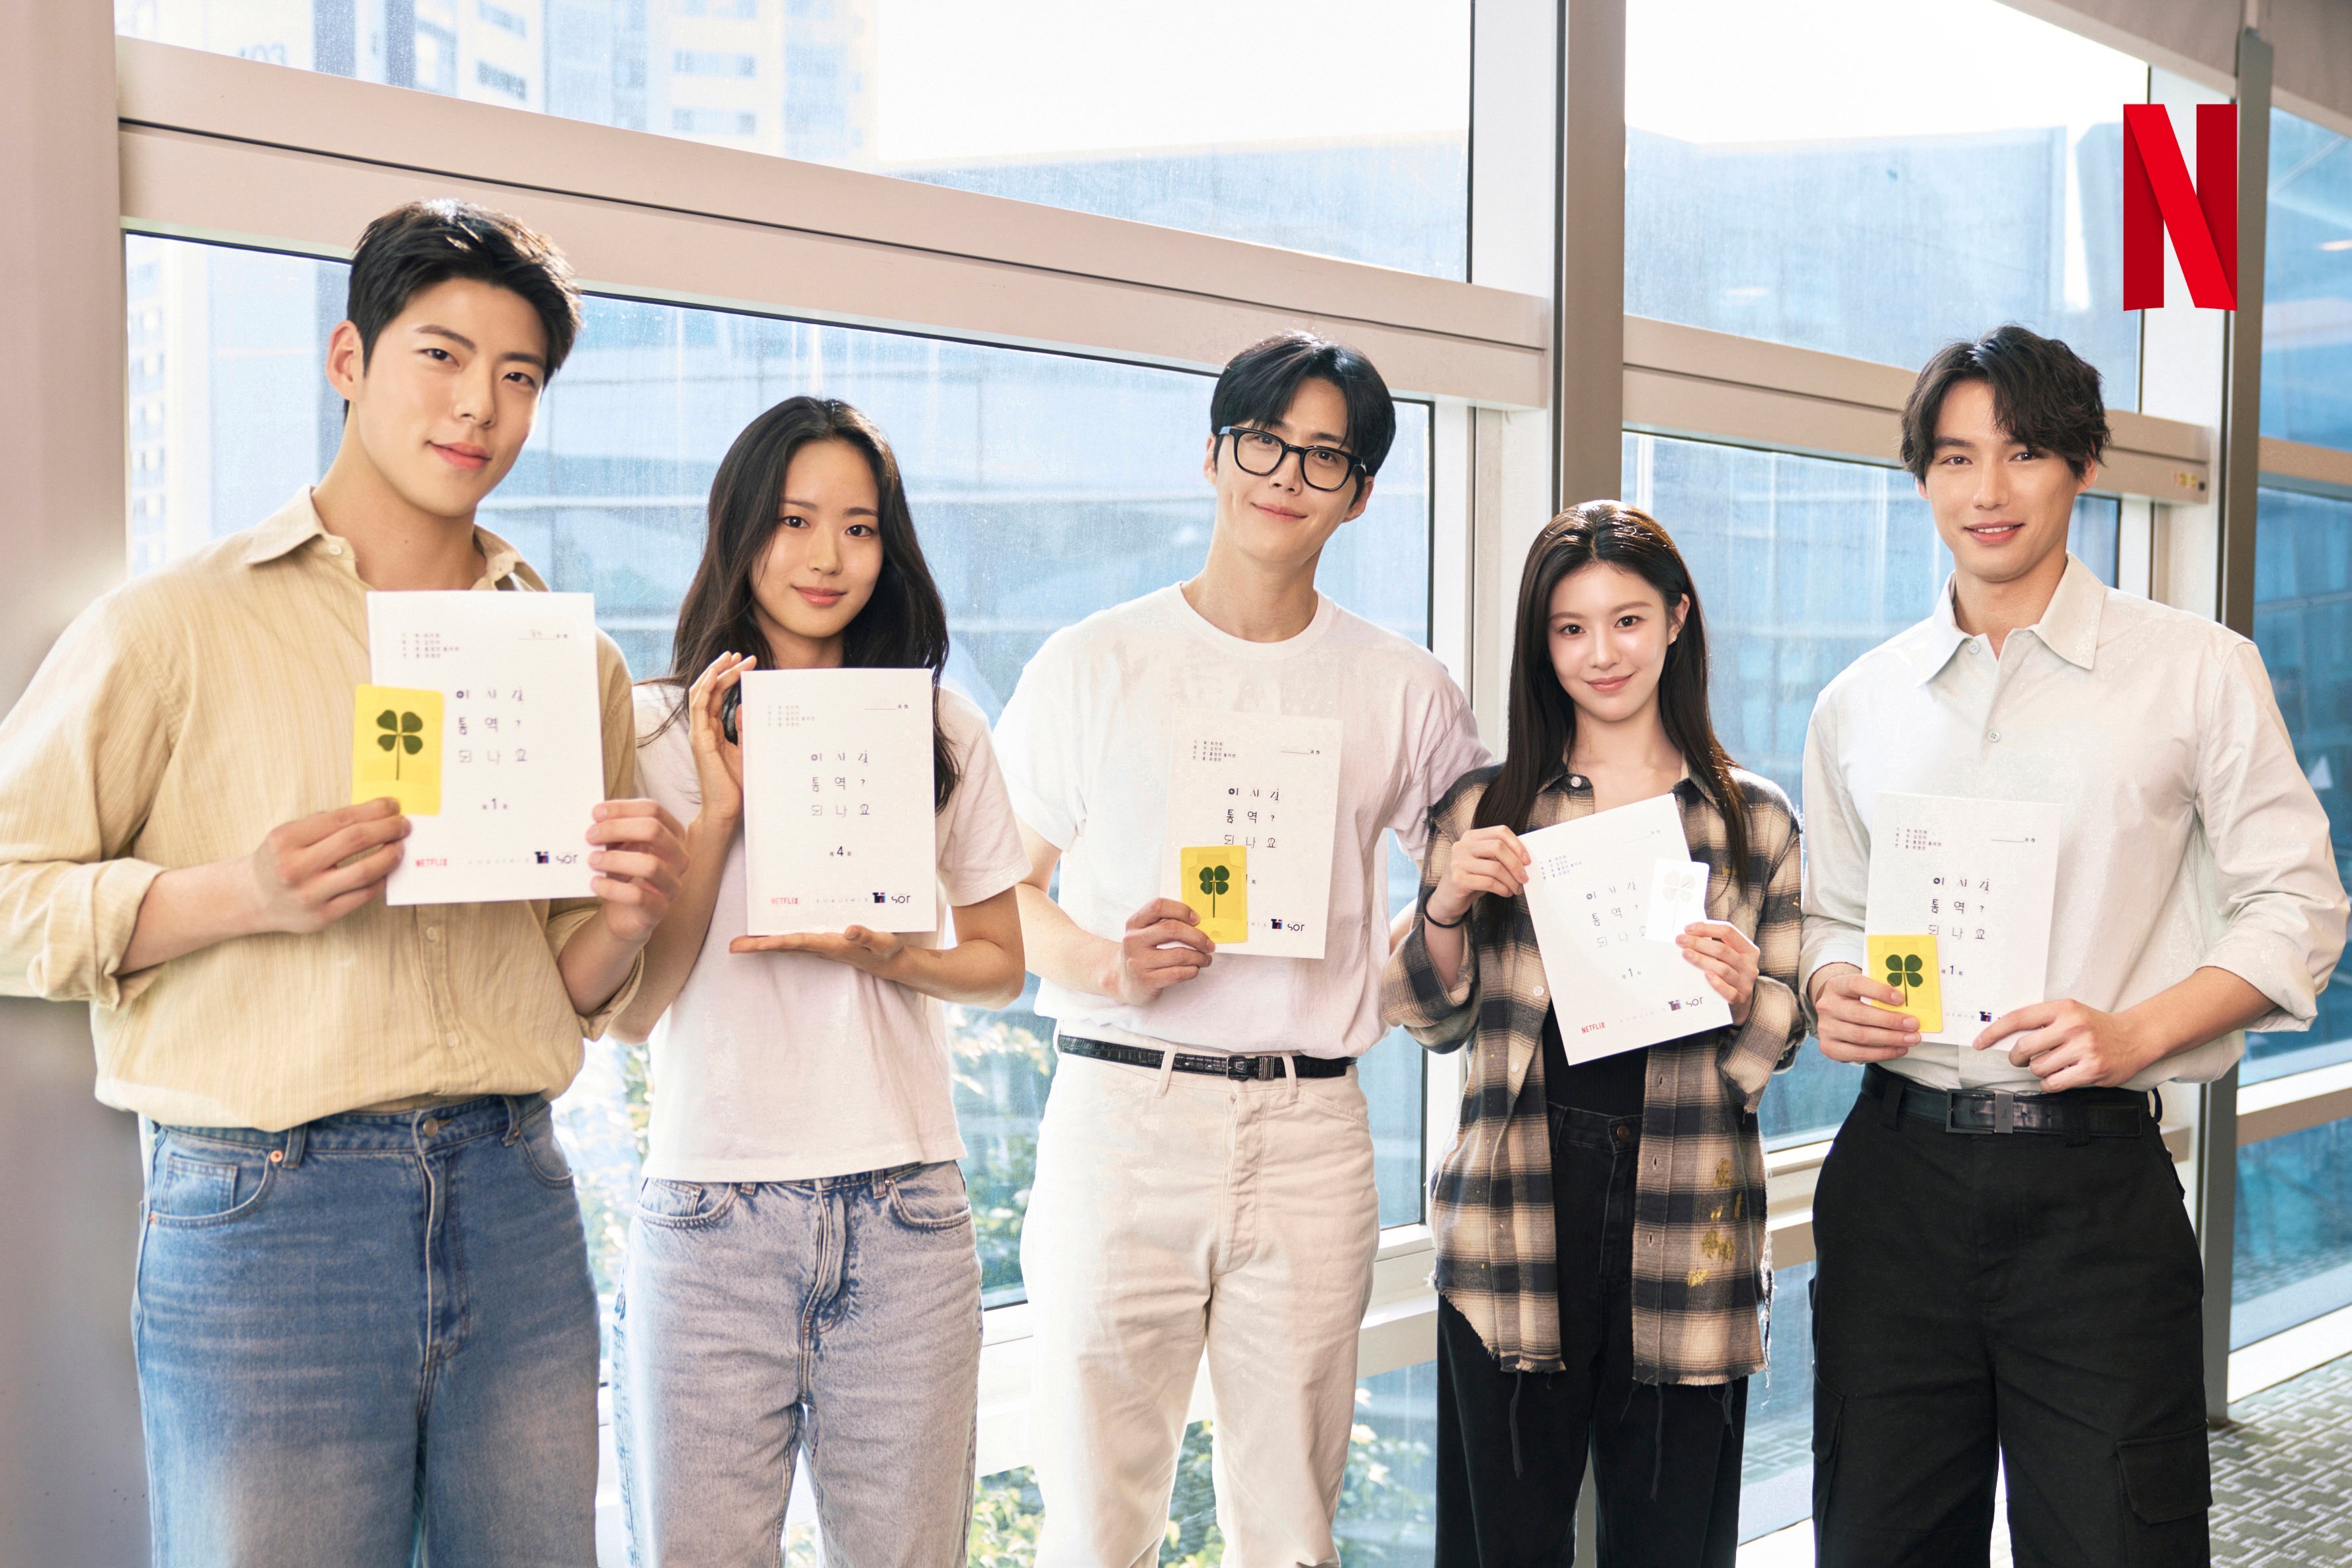 Kim Seon Ho, Go Youn Jung, And More Preview Chemistry At Script Reading For New Rom-Com Drama